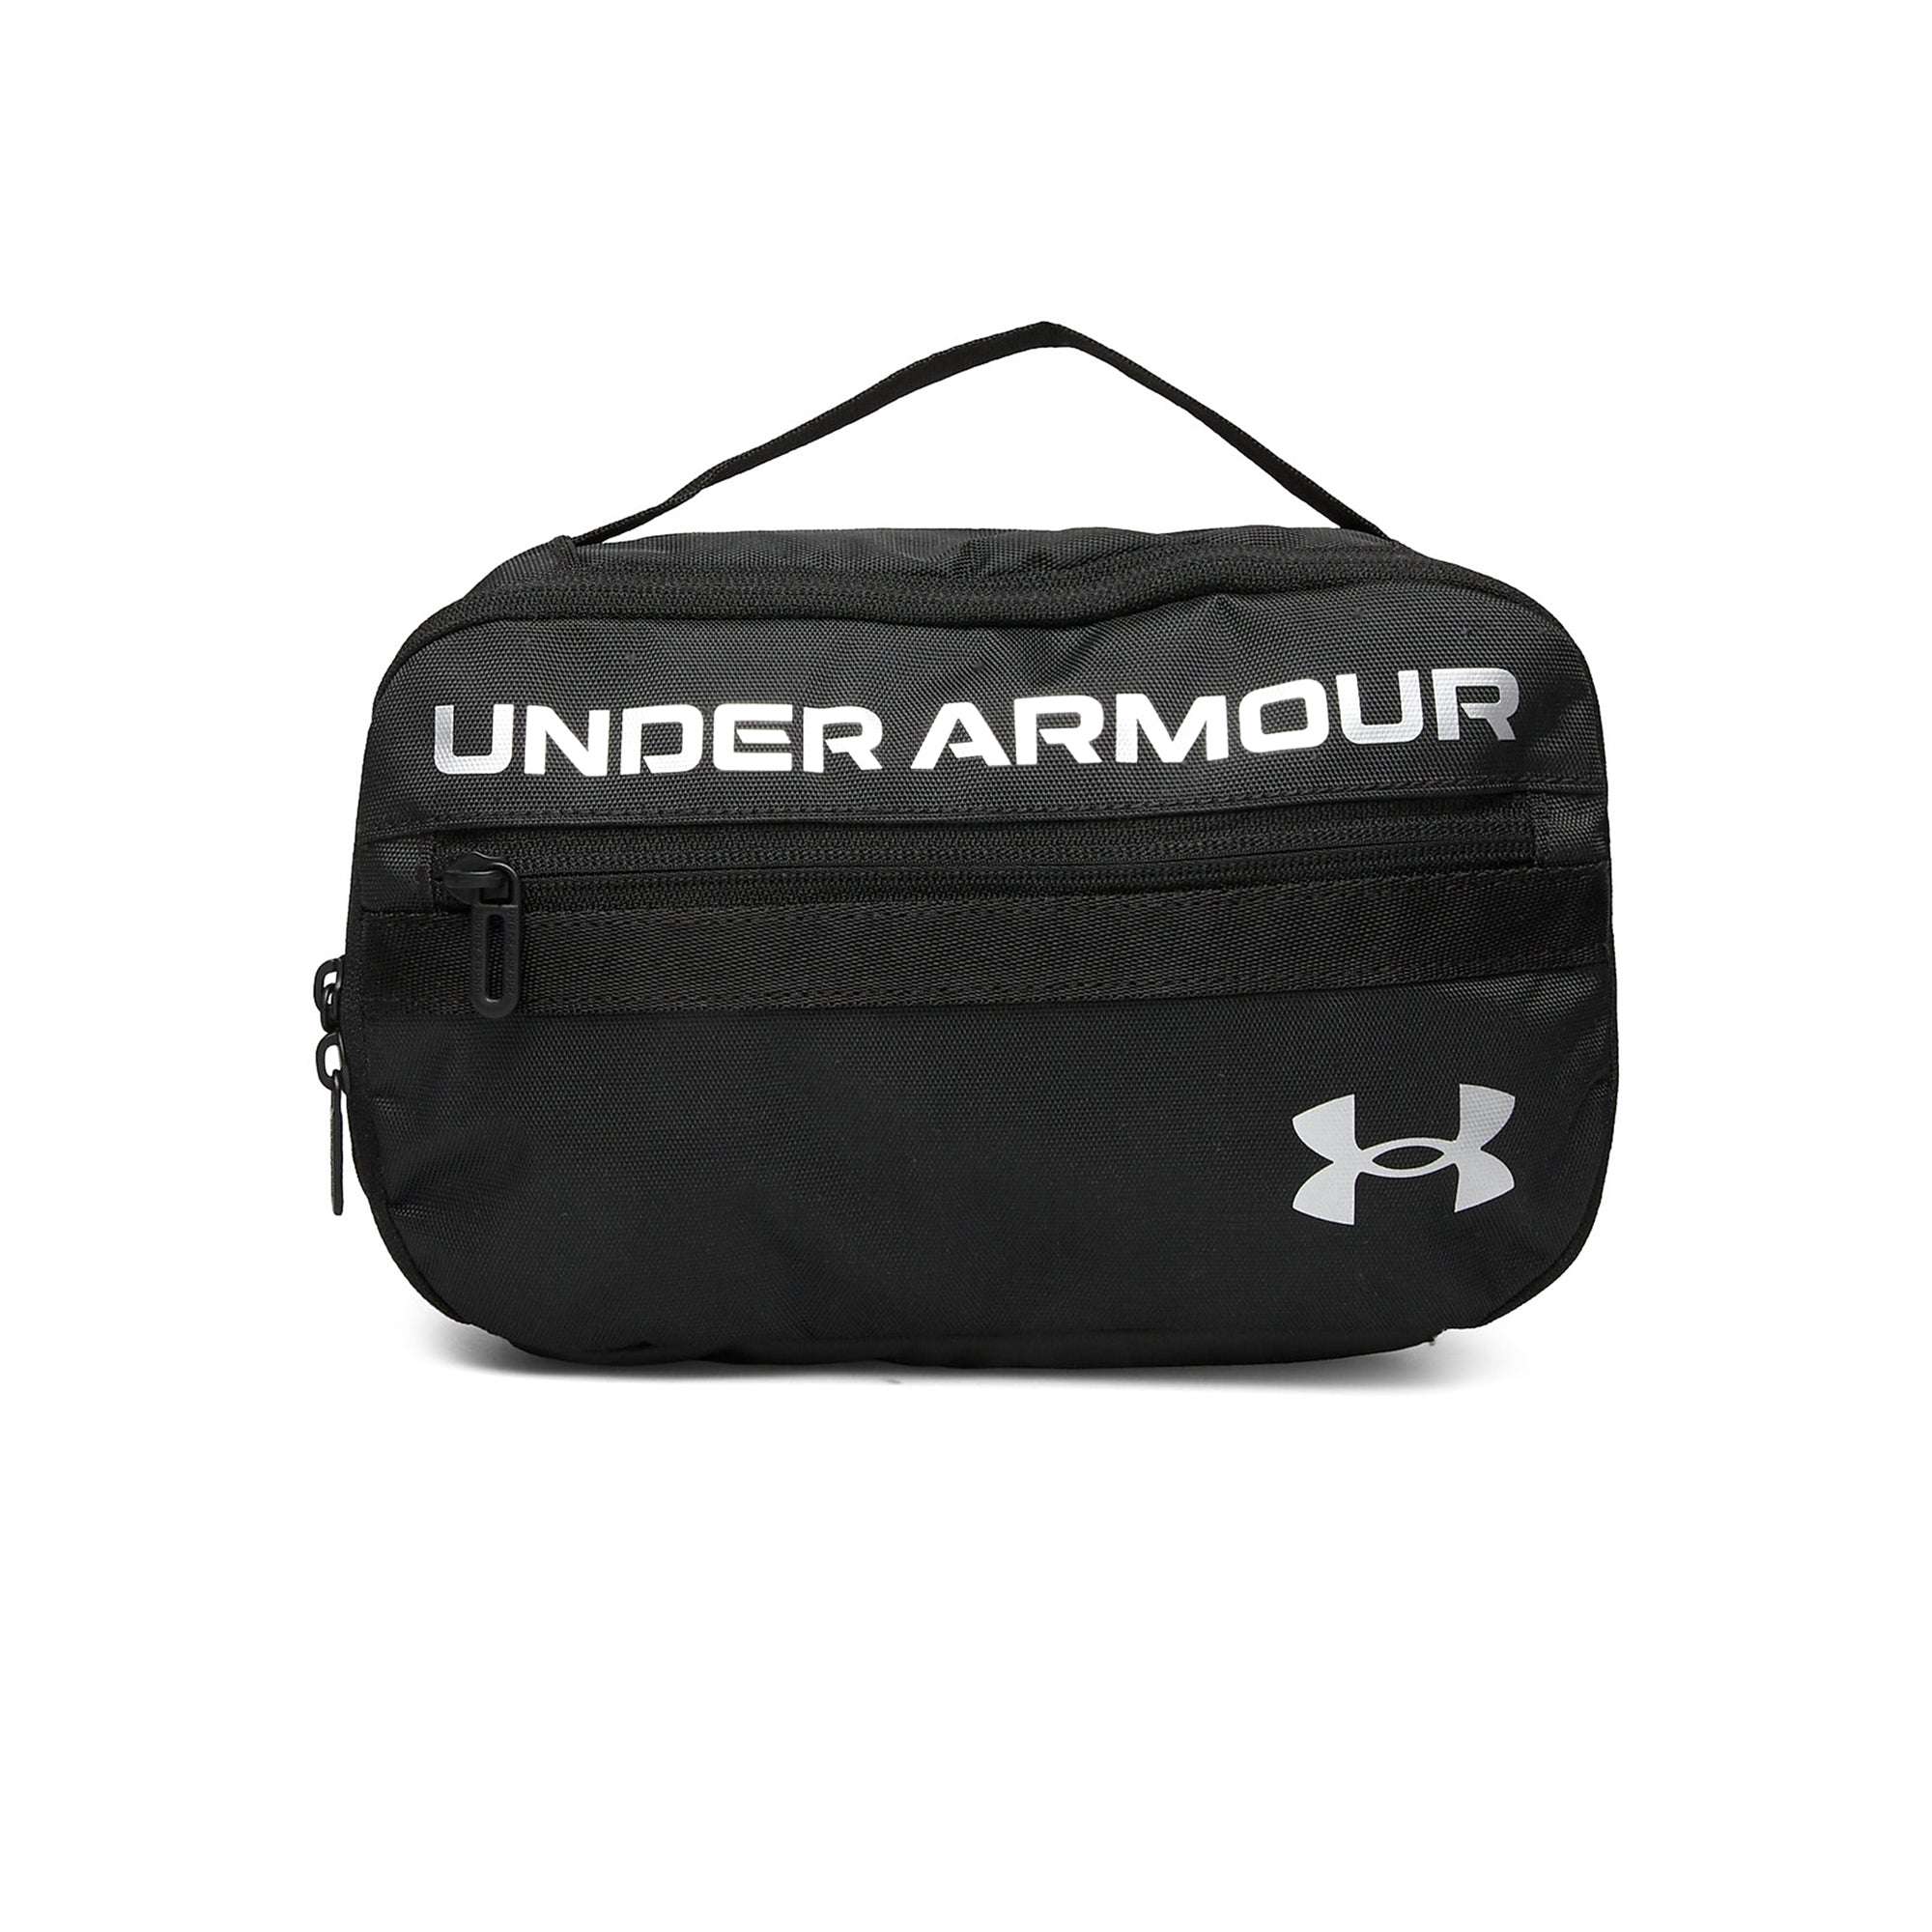 Under Armour Contain Travel Kit 1361993 Black 001 & Function18